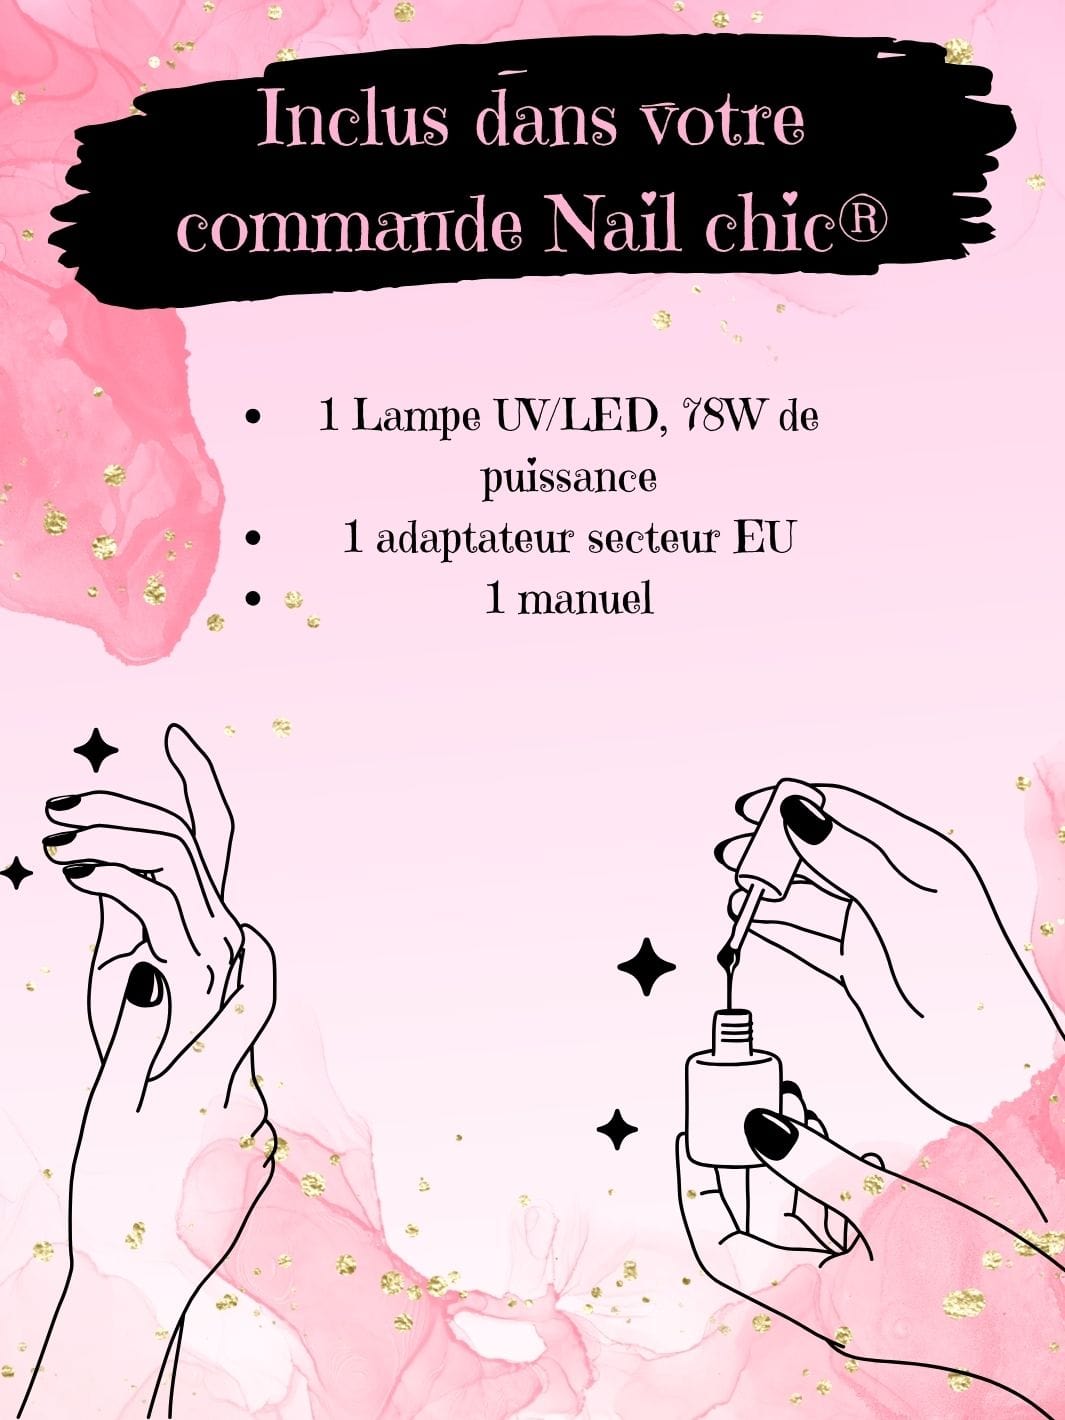 Meilleur lampe uv led ongles professionnelle Nail Chic